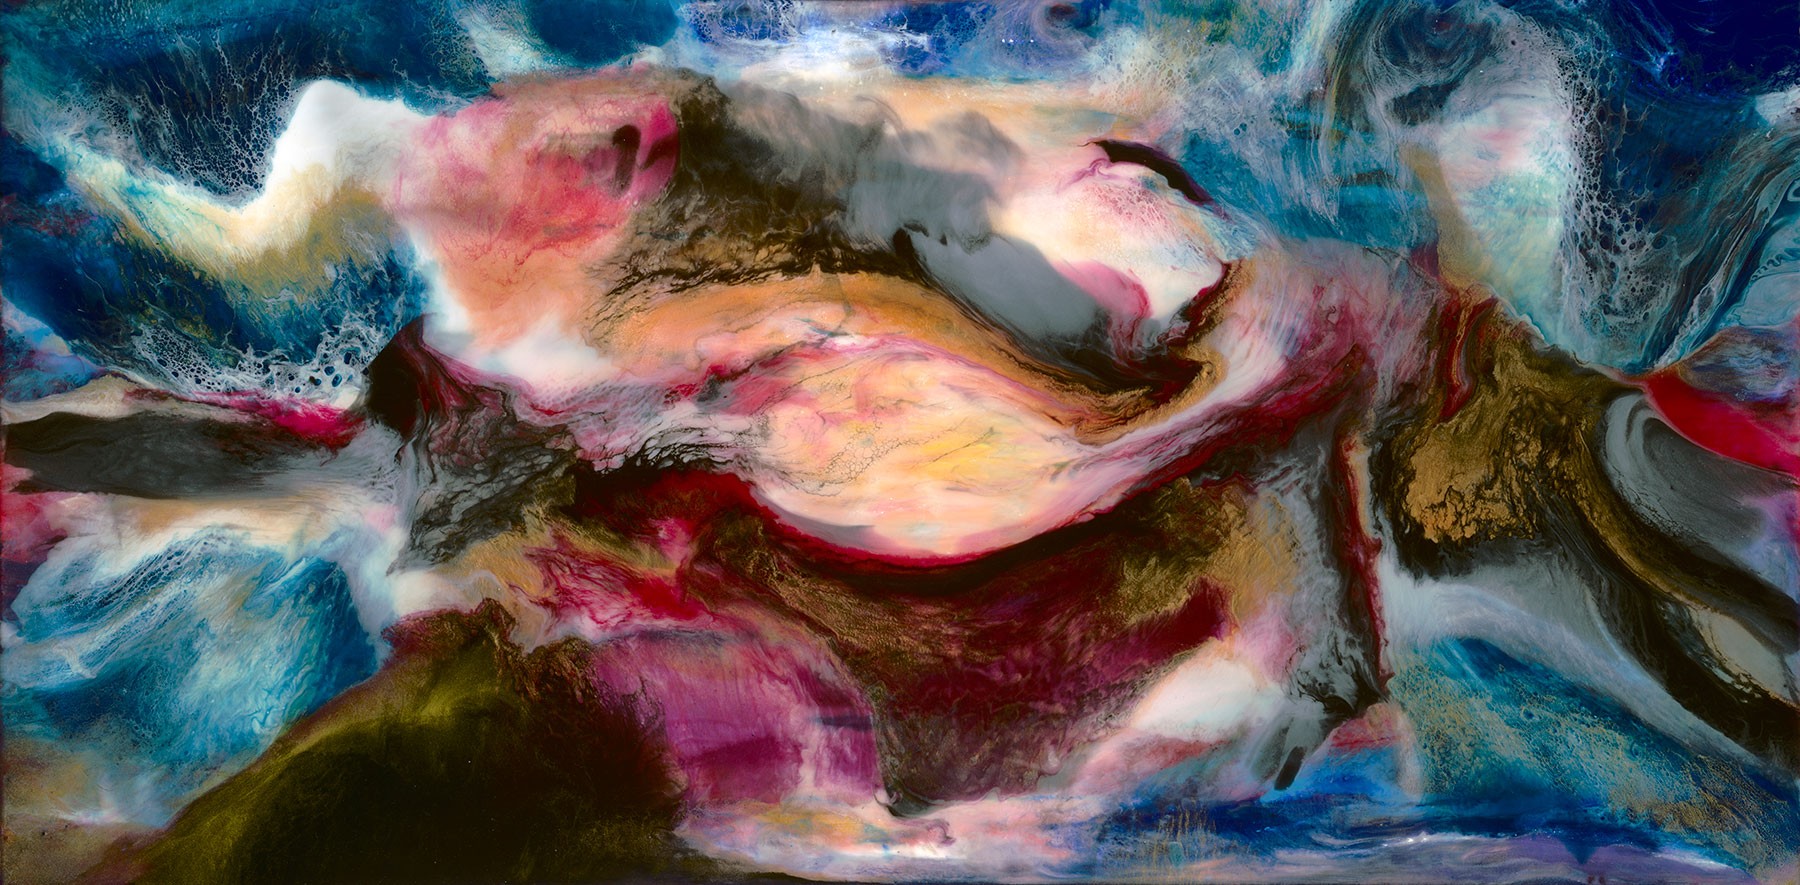 Abstract Art. Title: The Beginning, Mixed Media, 24 x 48 in by Contemporary Canadian artist Holly Bromley.